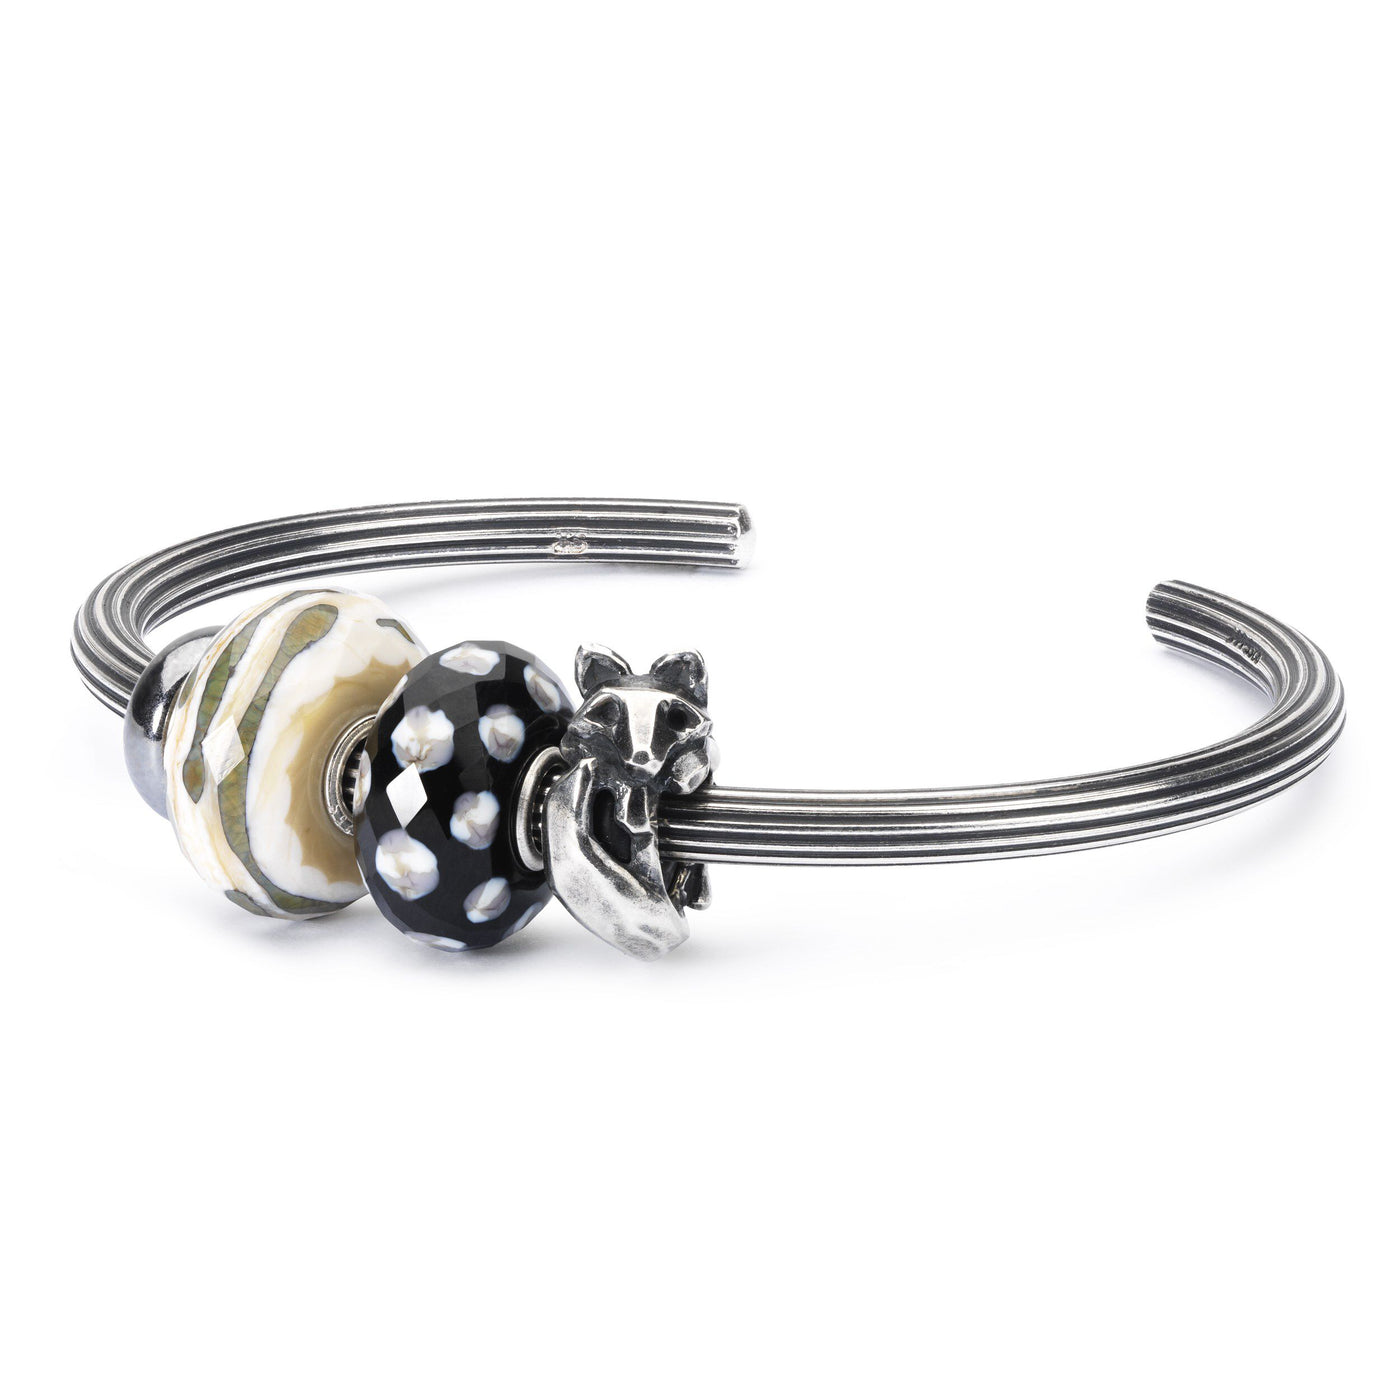 Sneaky Fox Spacer - Trollbeads Canada